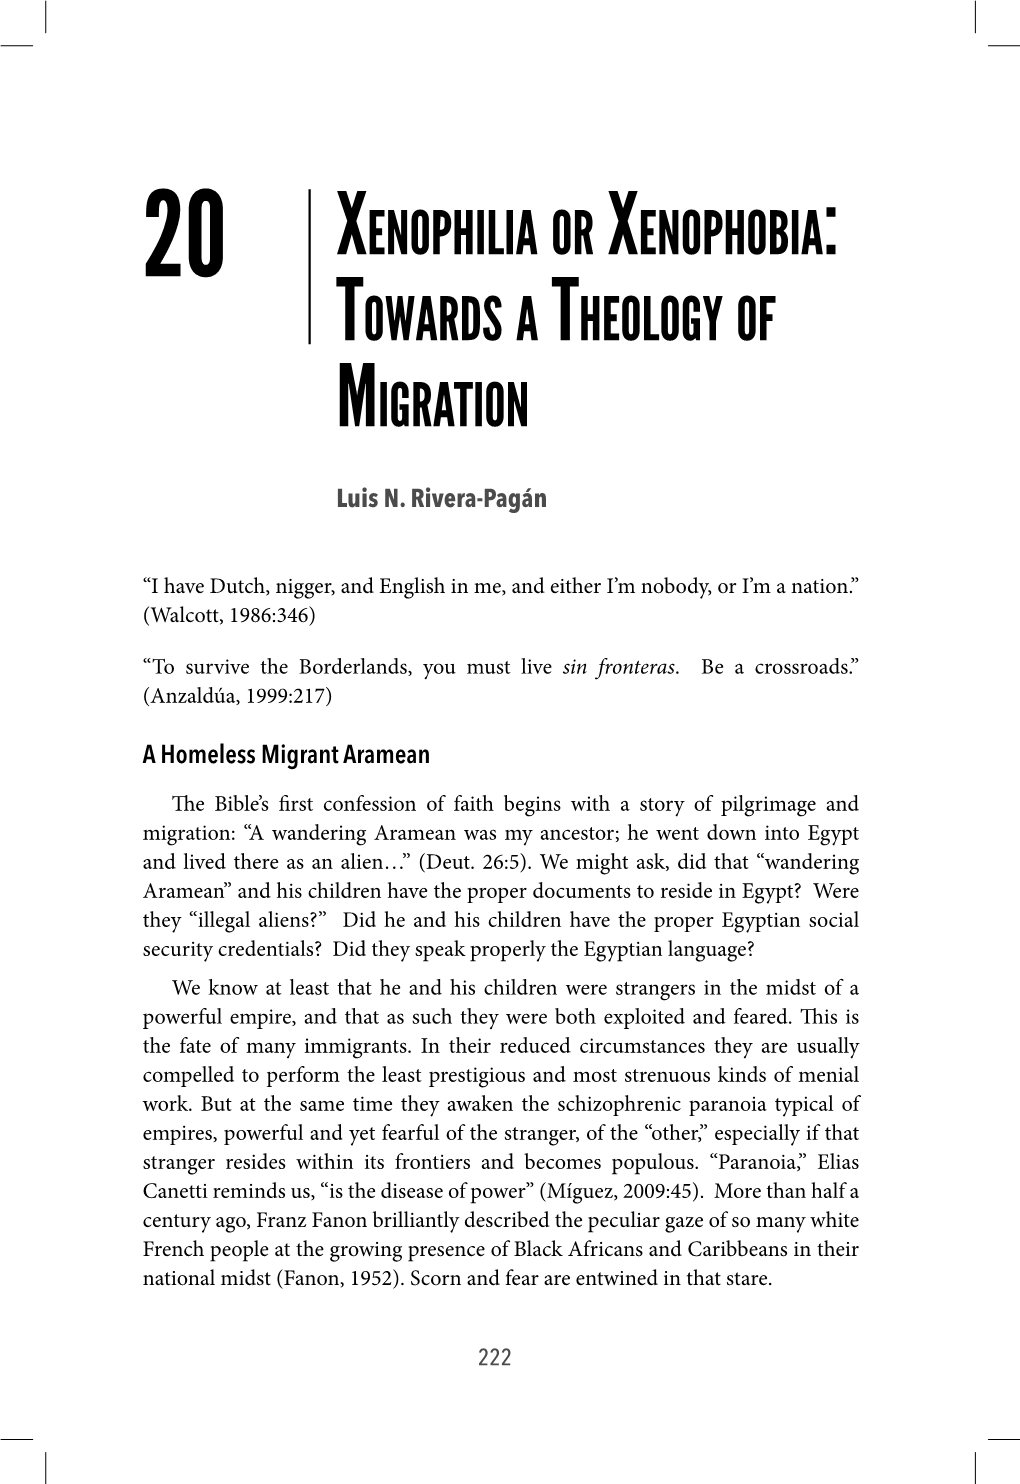 20 Xenophilia Or Xenophobia: Towards a Theology of Migration